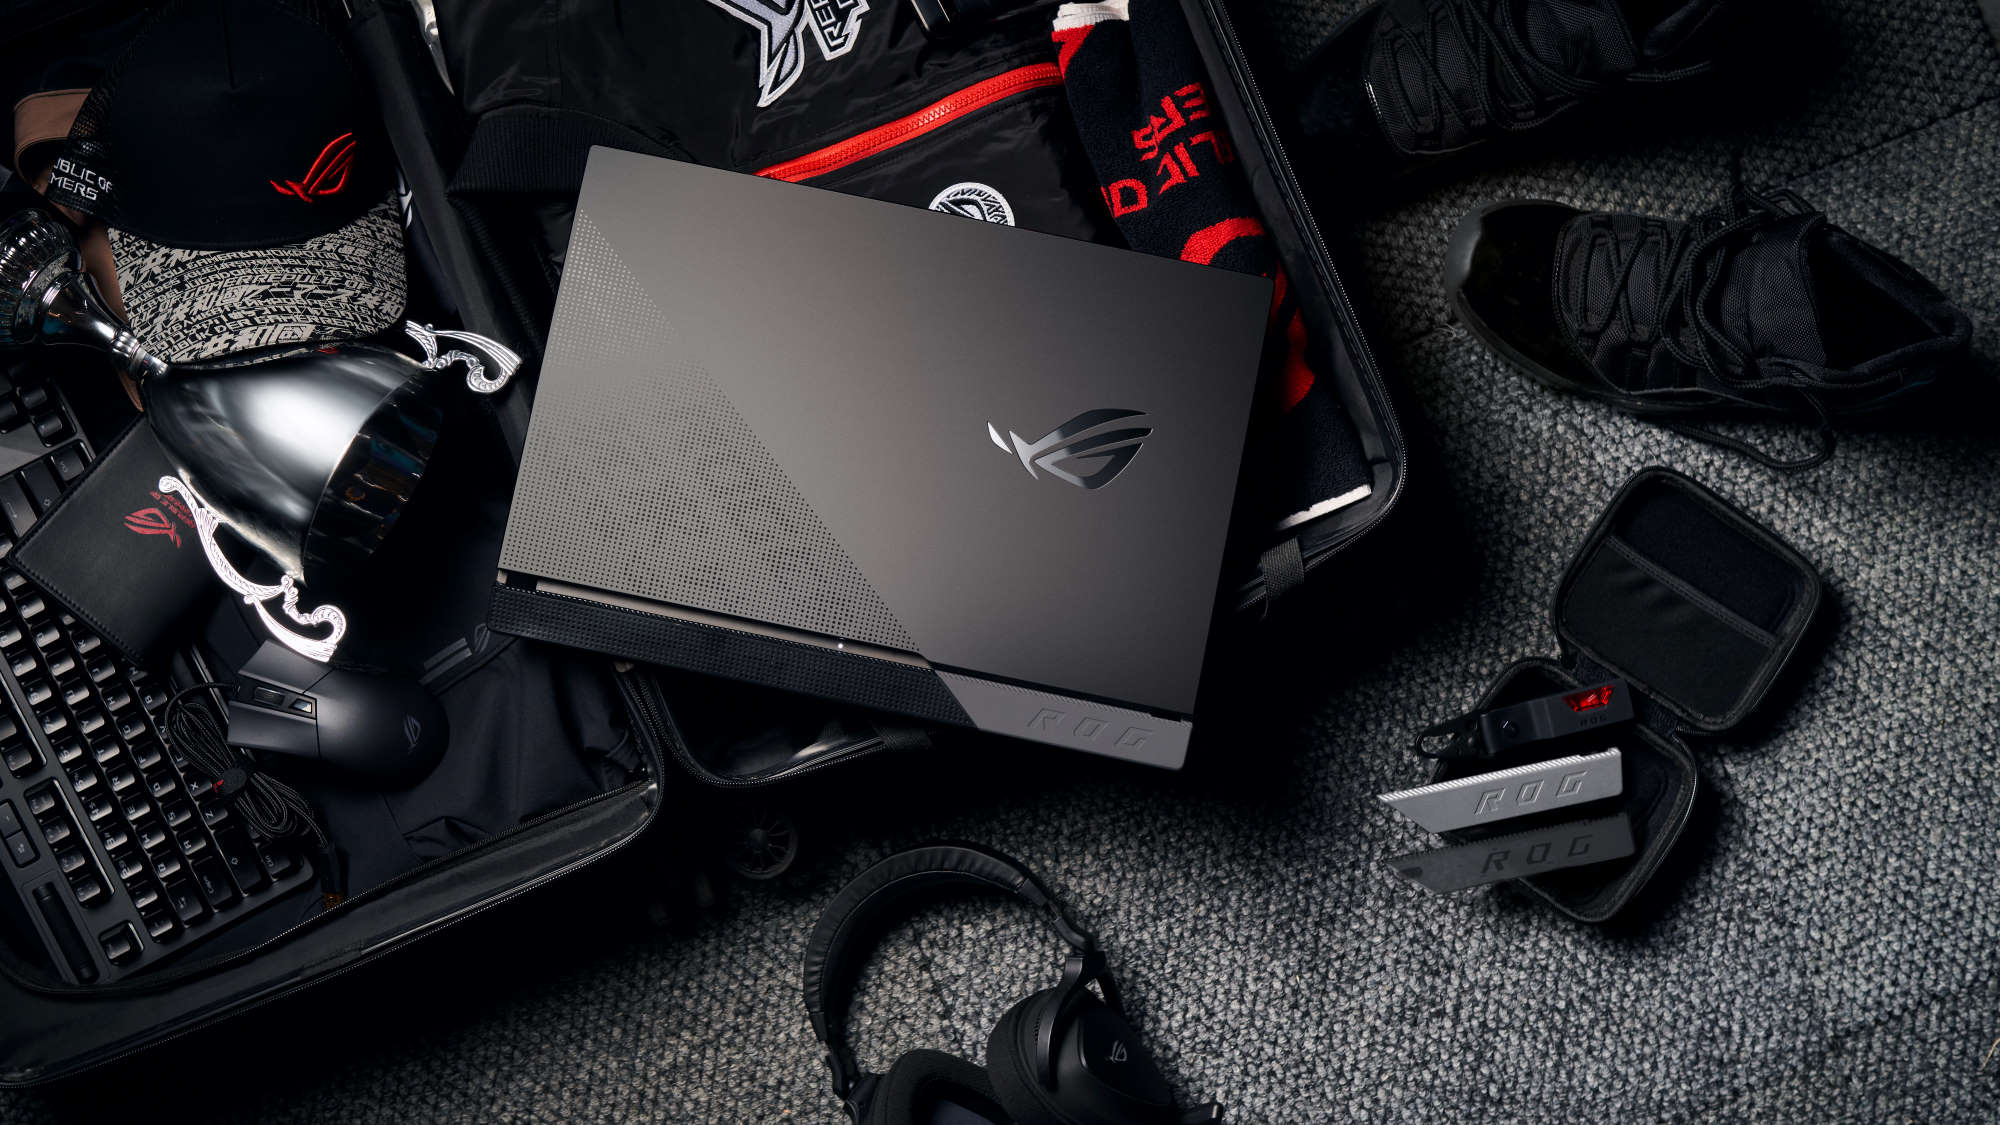 Redesigned ROG Strix gaming laptops introduce the world's fastest notebook  display